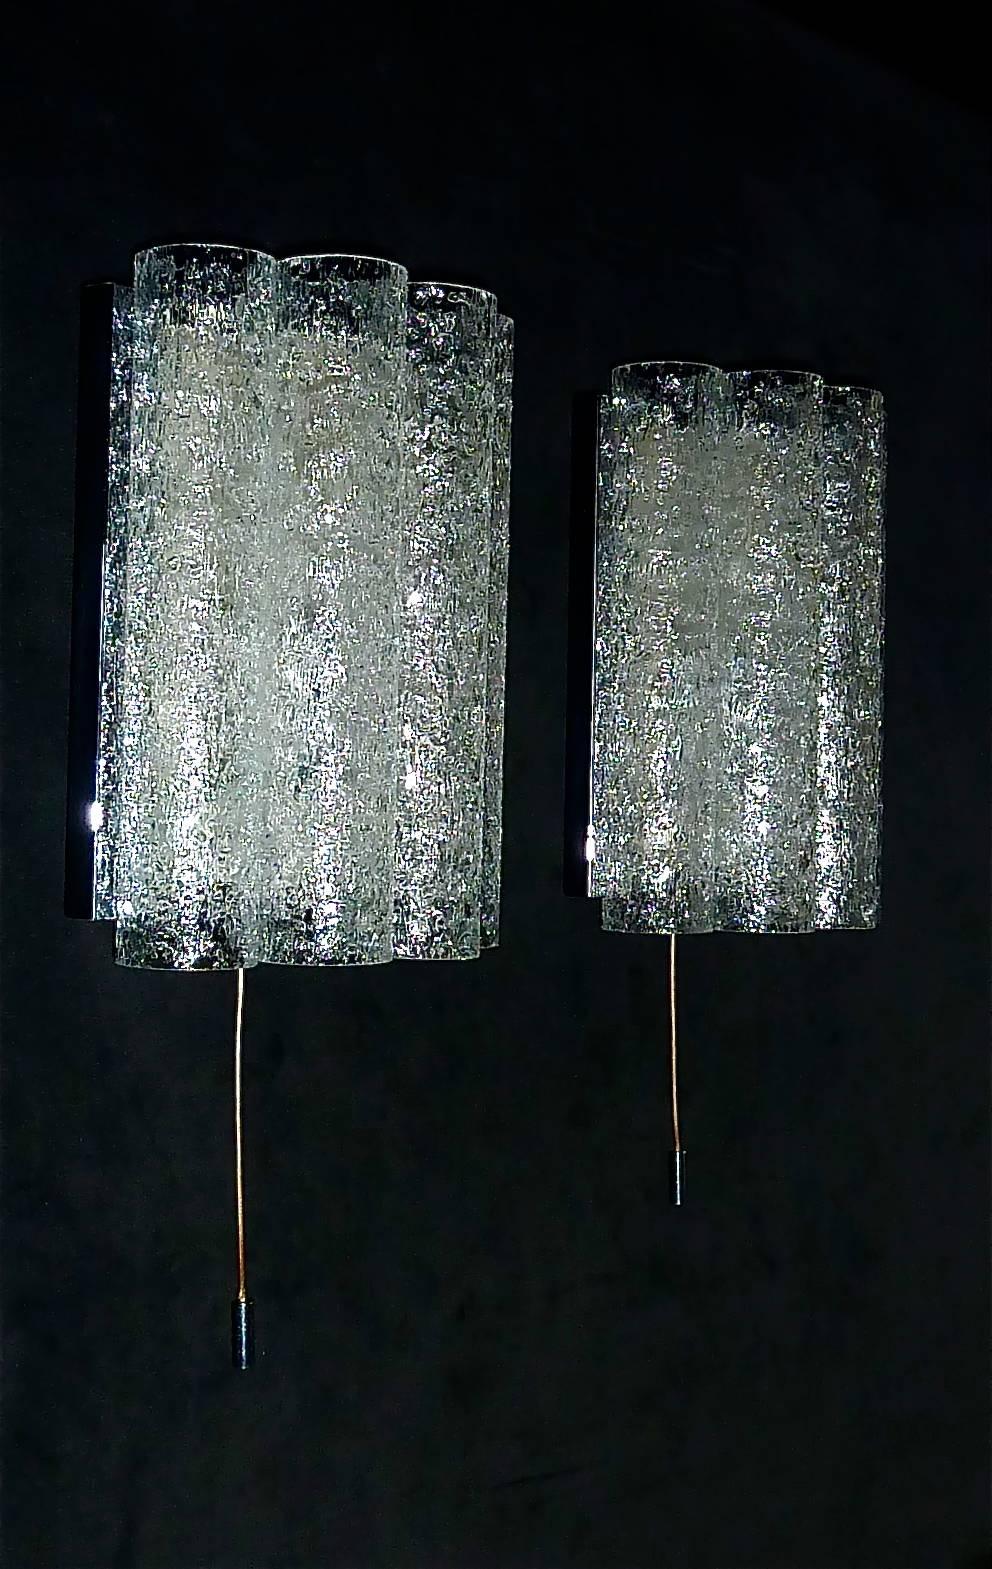 German Chromed Pair of Midcentury Ice Glass Tube Sconces by Doria 1960s in Kalmar Style